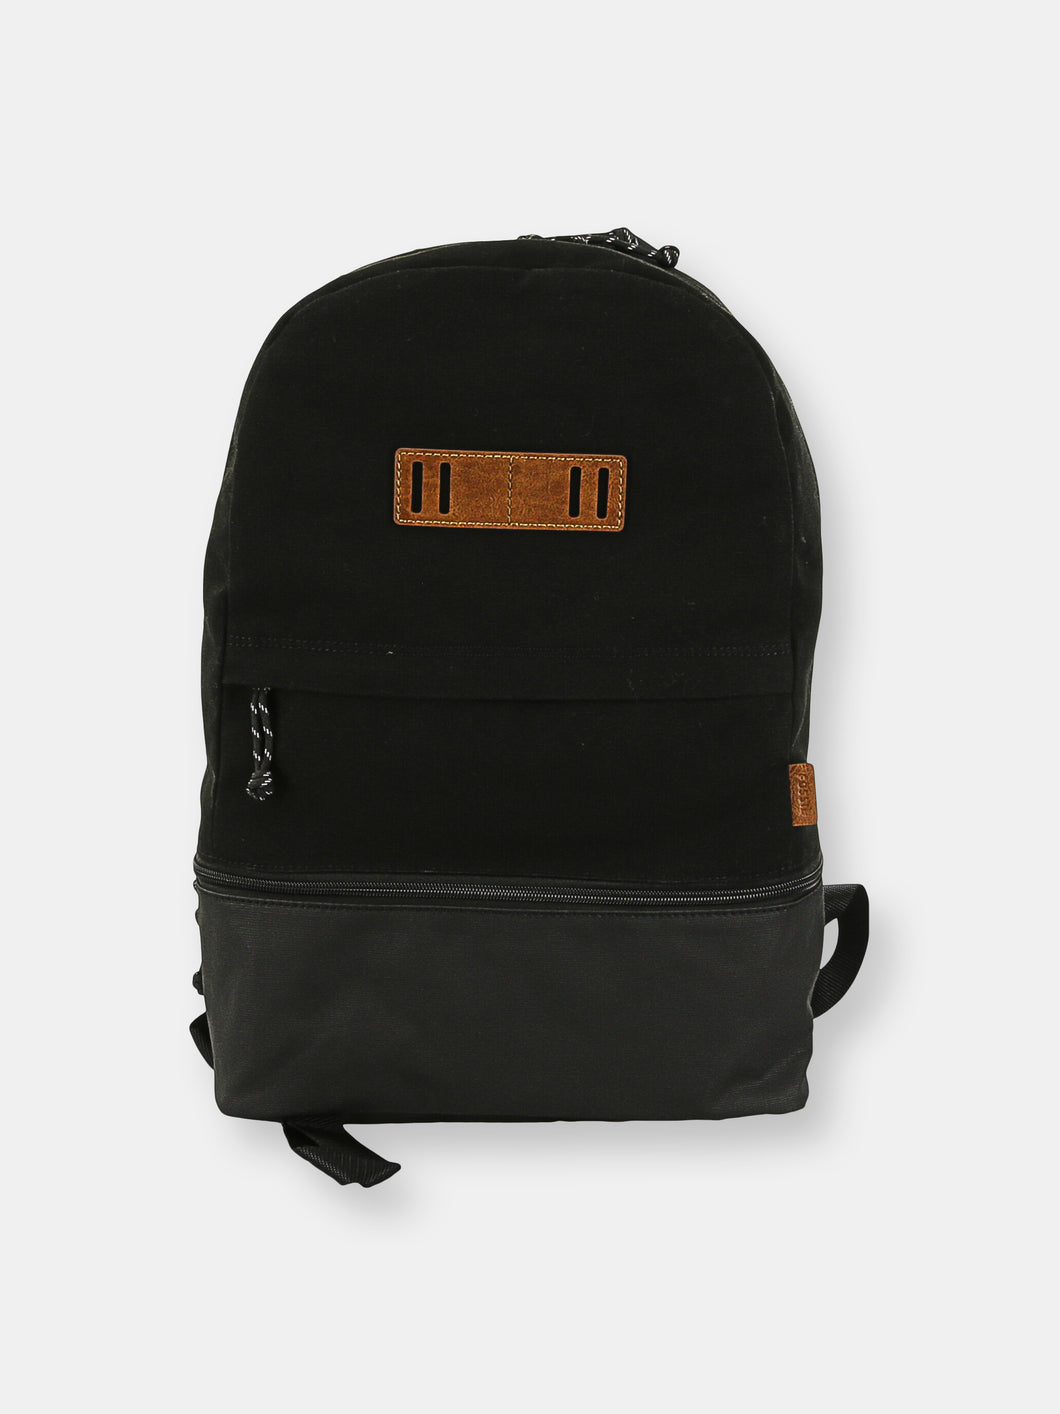 Fossil Summit Canvas Backpack for Men